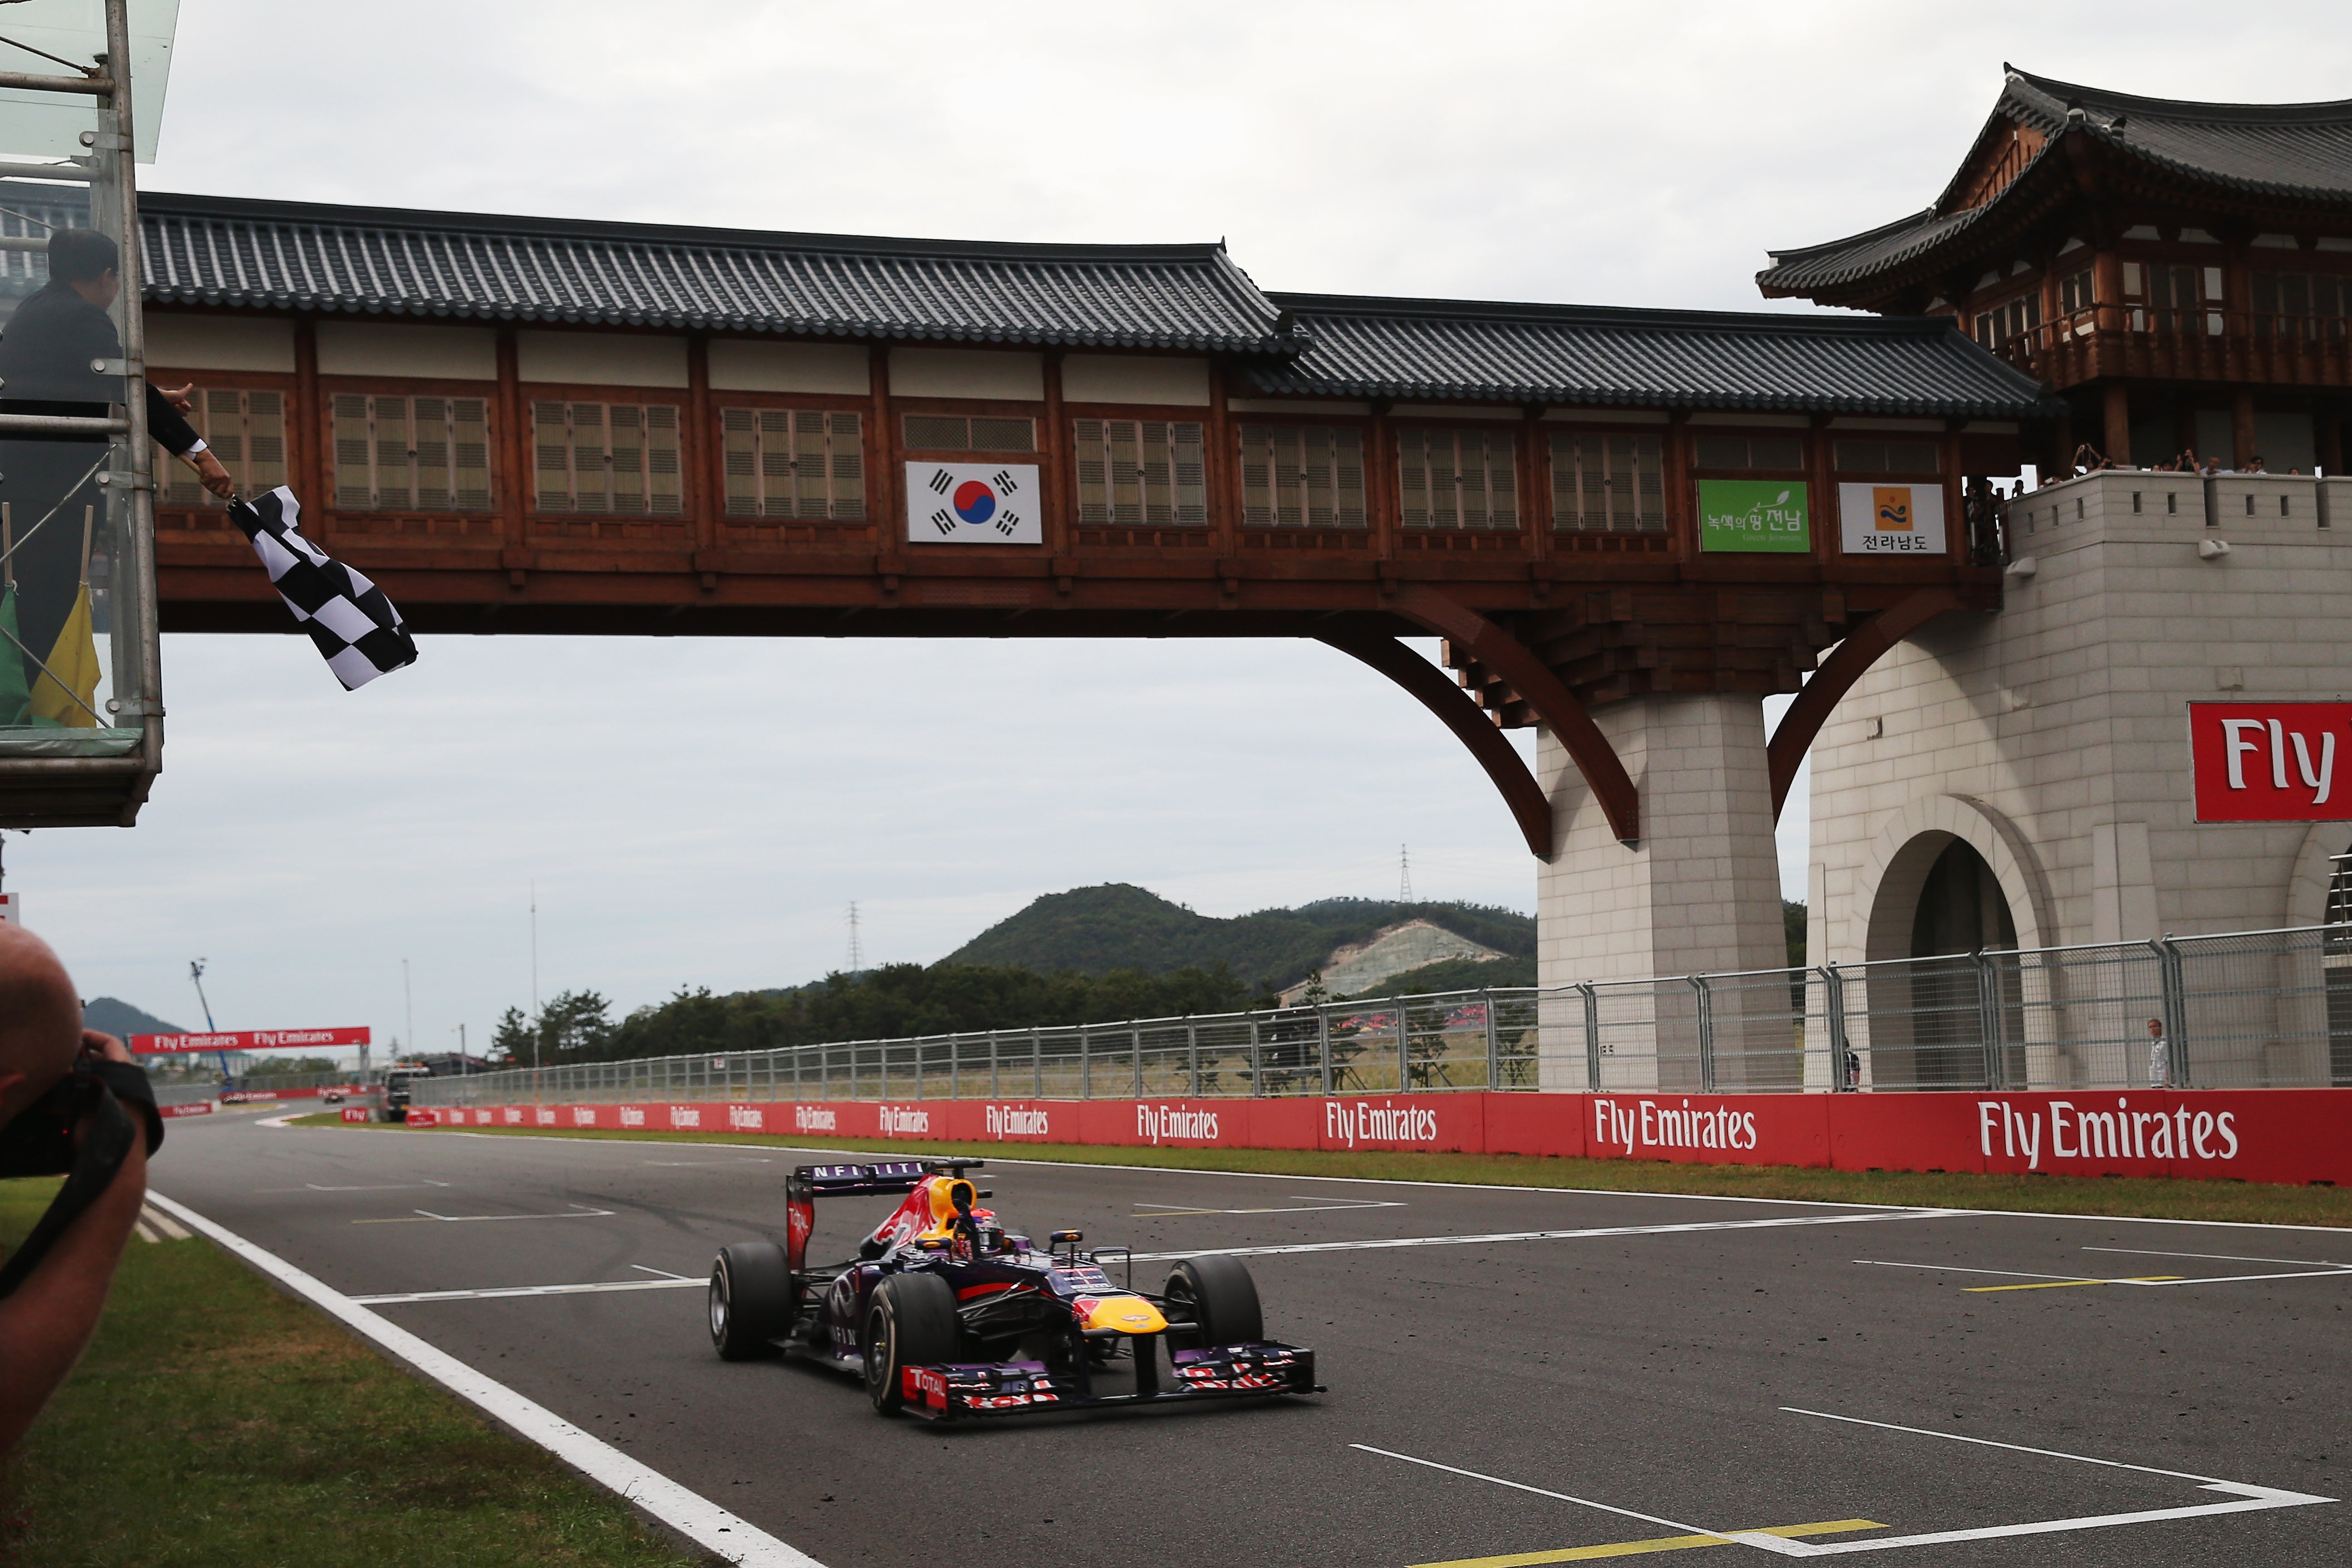 F1 hosted a race in South Korea from 2010-2013